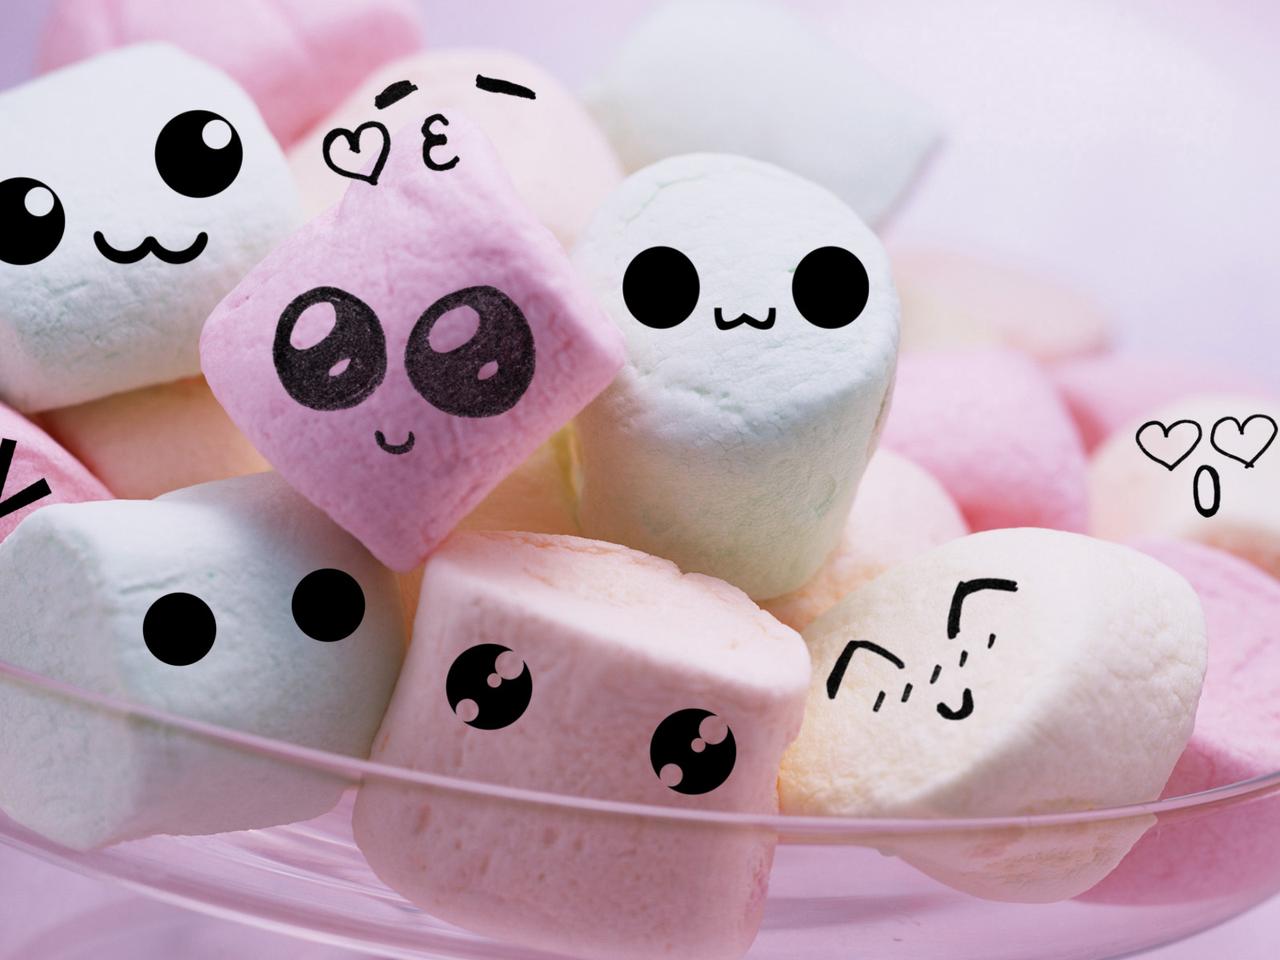 Cute and funny faces on marshmallows Wallpaper Download 1280x960